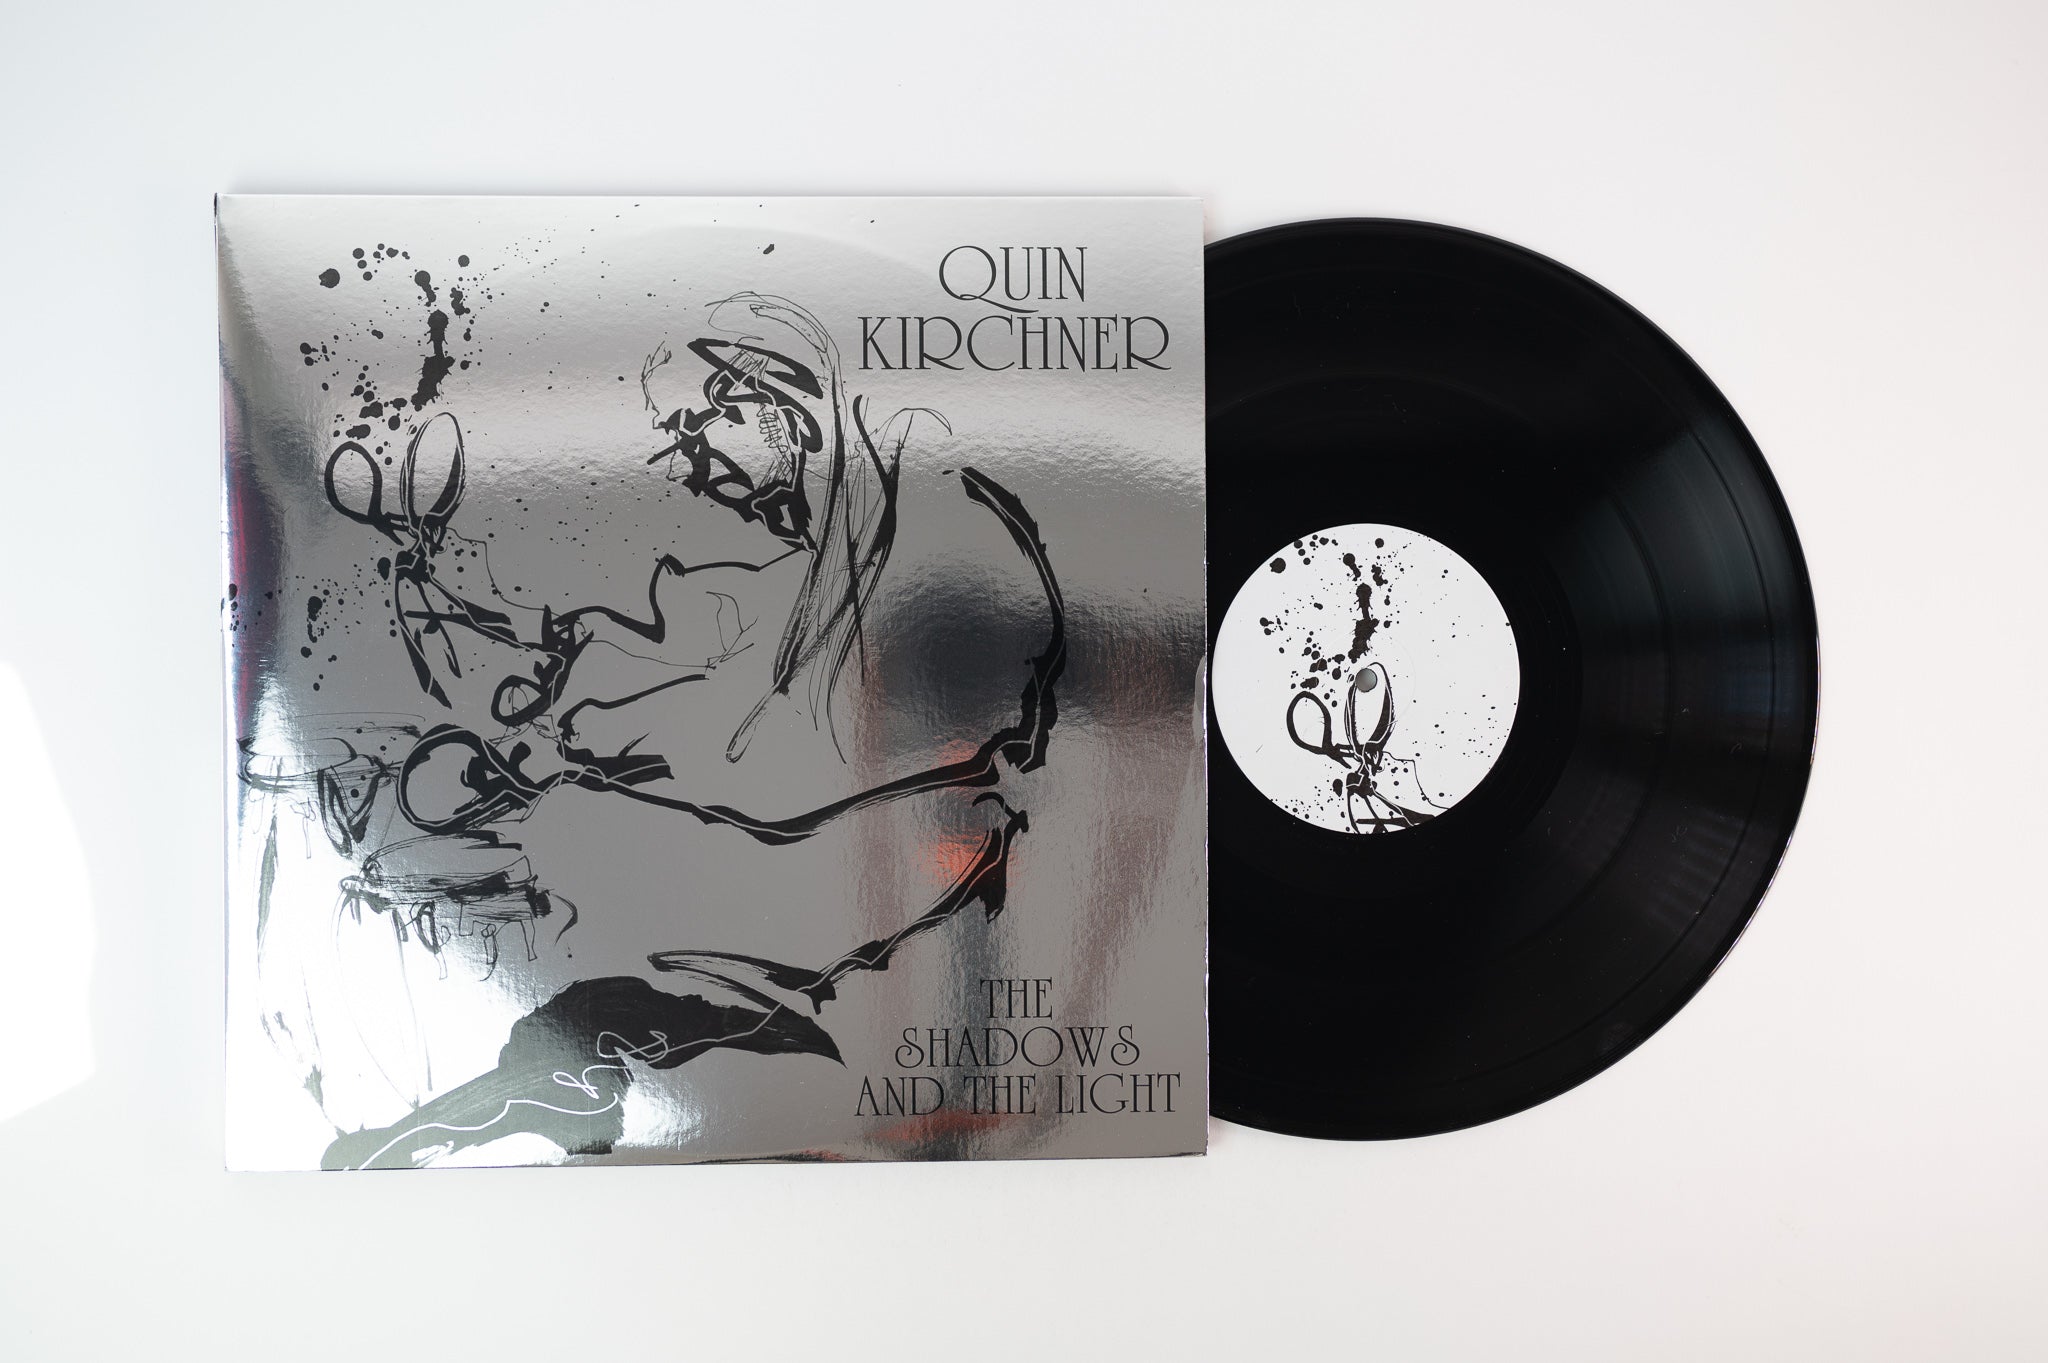 Quin Kirchner - The Shadows And The Light on Astral Spirits